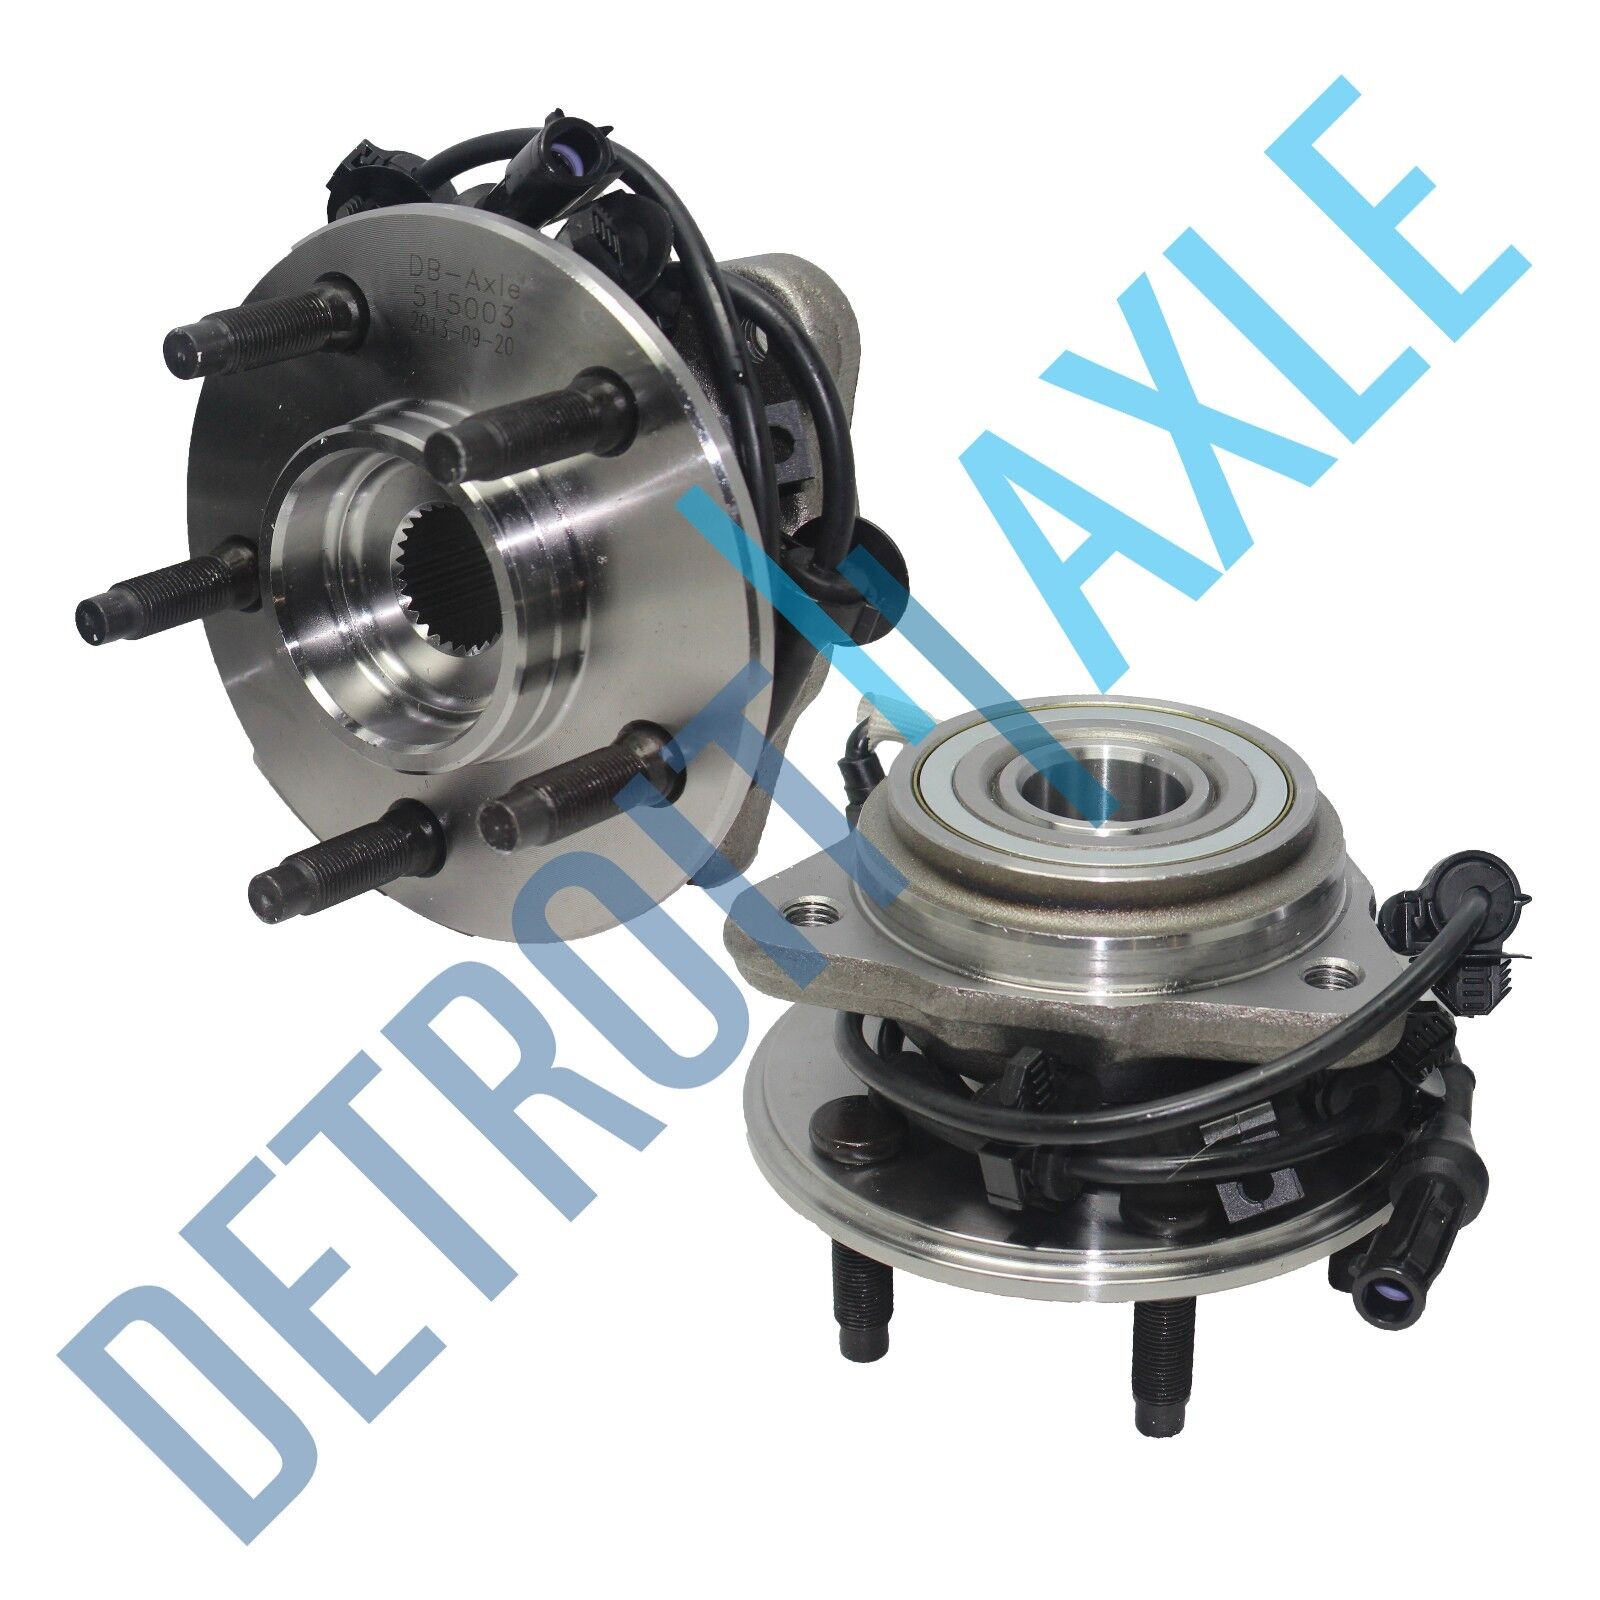 Set of (2) New Front Wheel Hub and Bearings for Ford Ranger Mazda Mercury 4x4